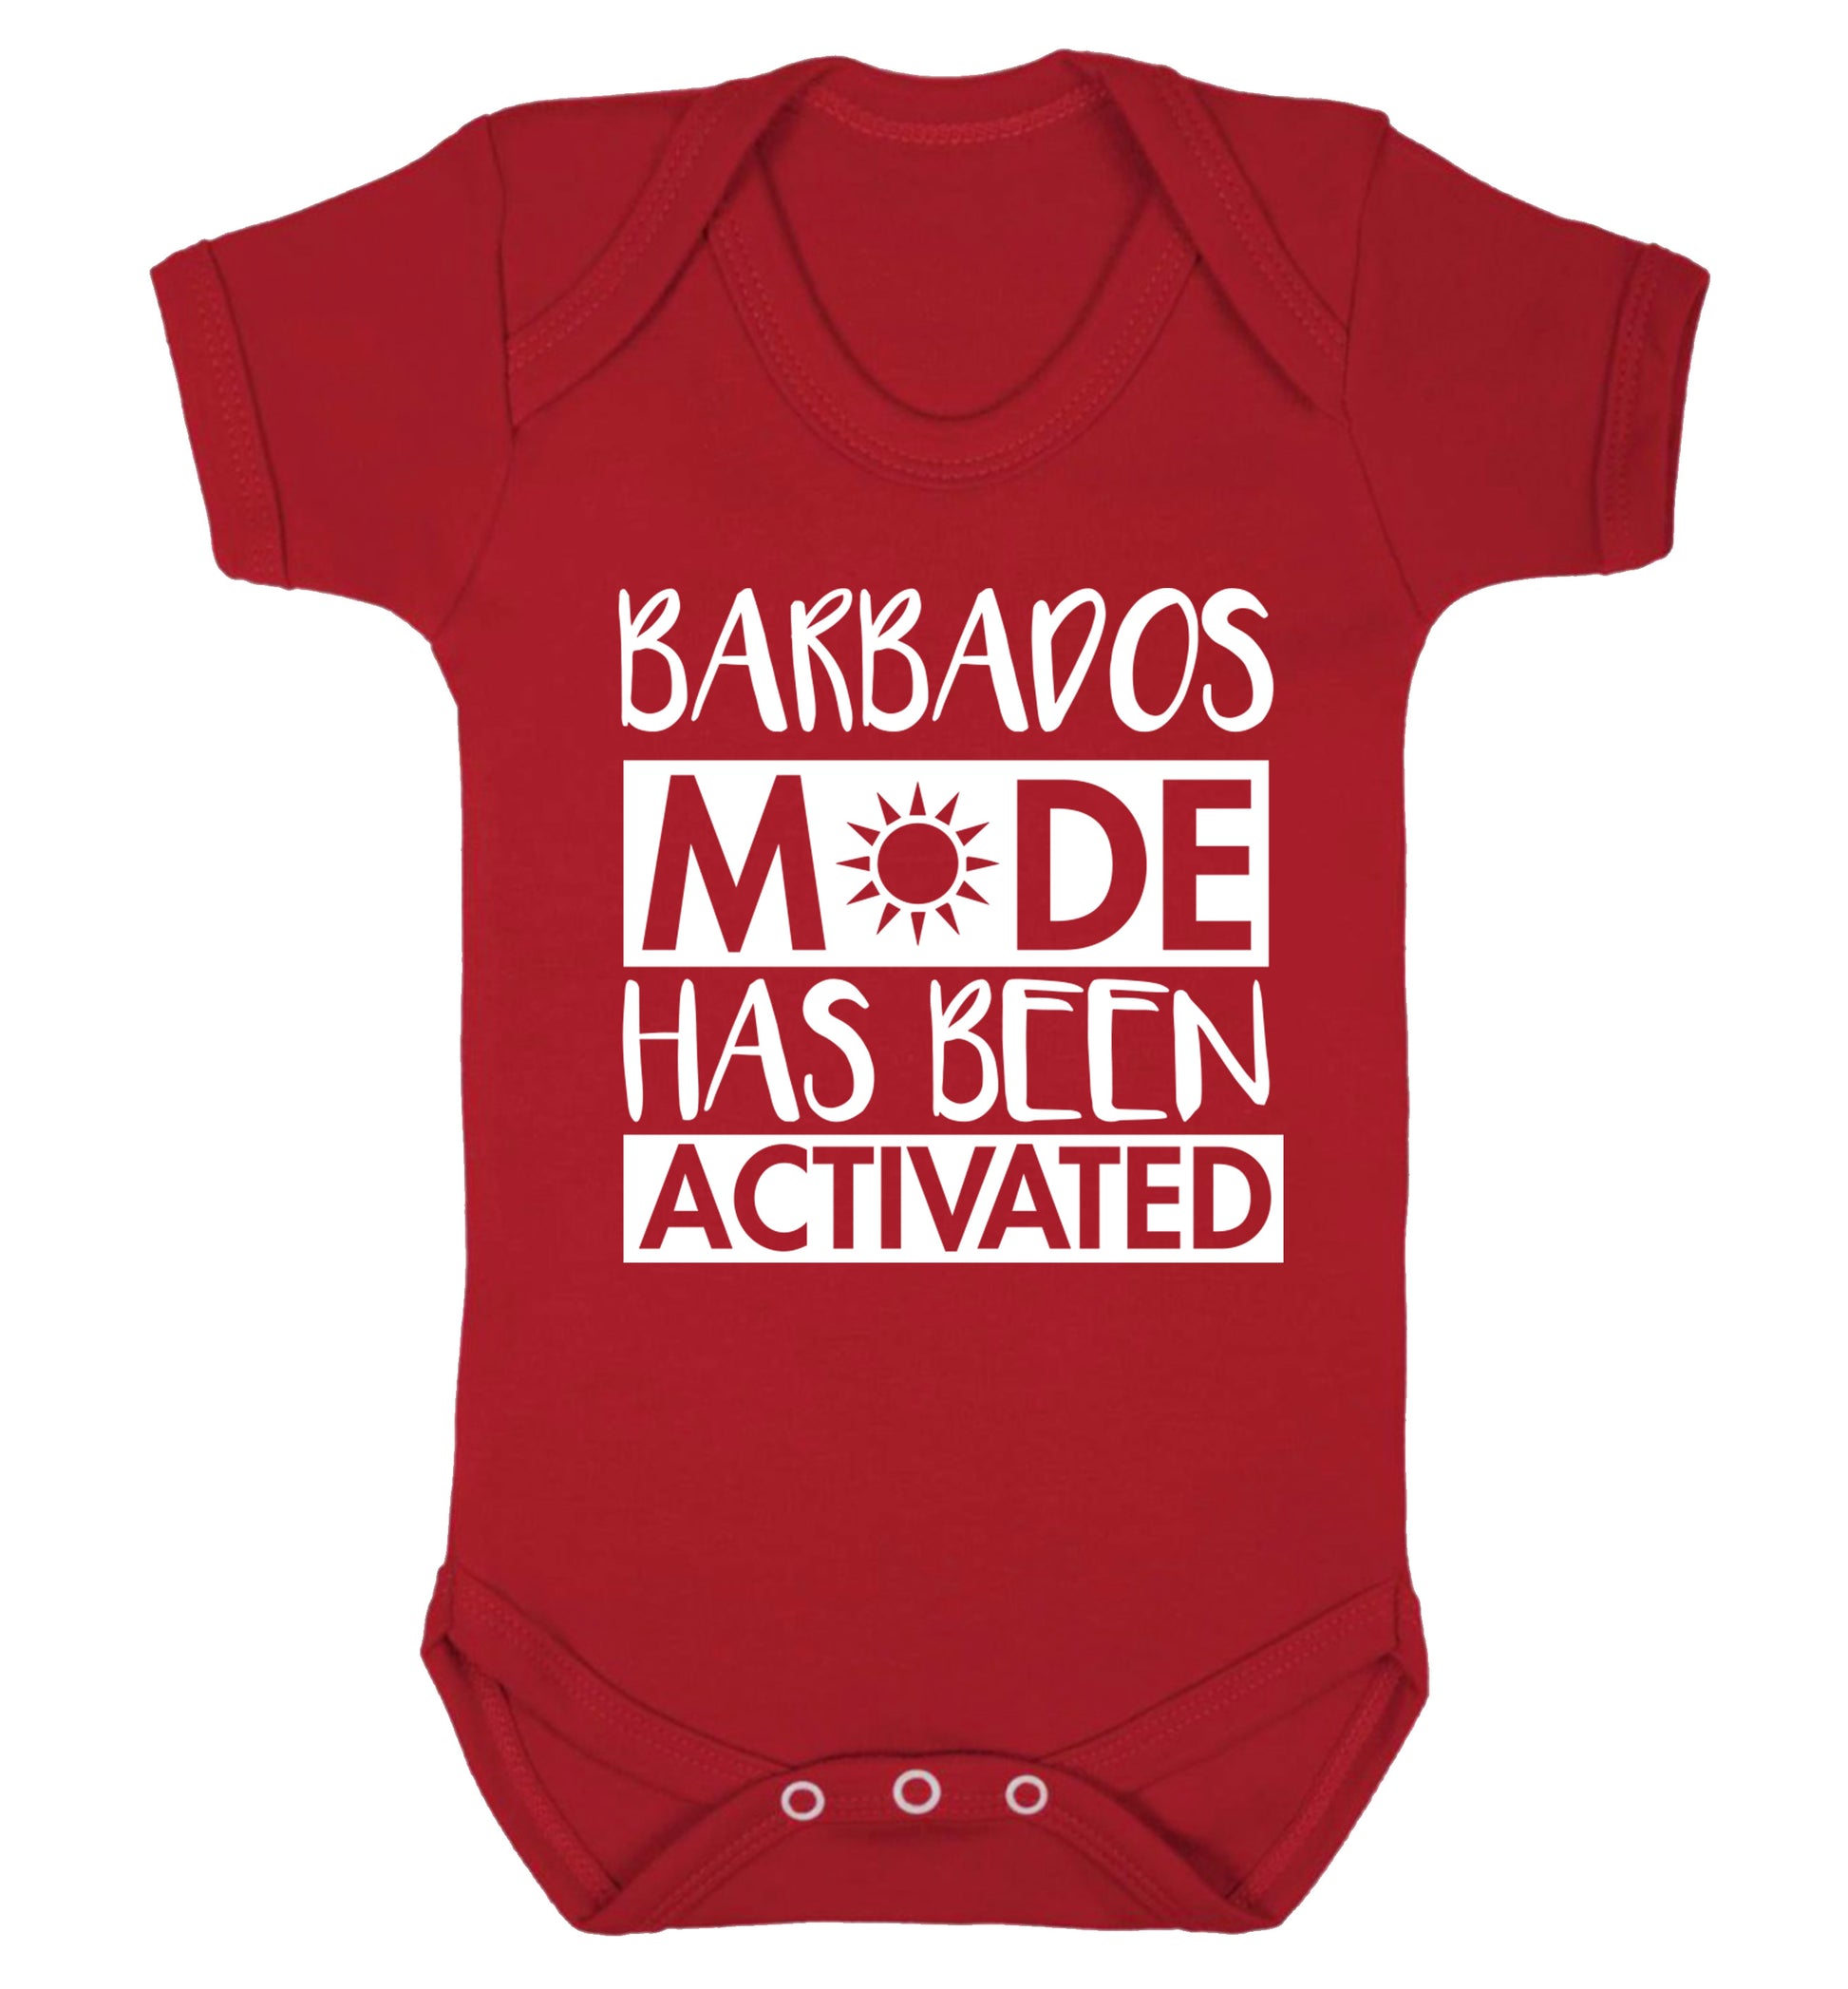 Barbados mode has been activated Baby Vest red 18-24 months